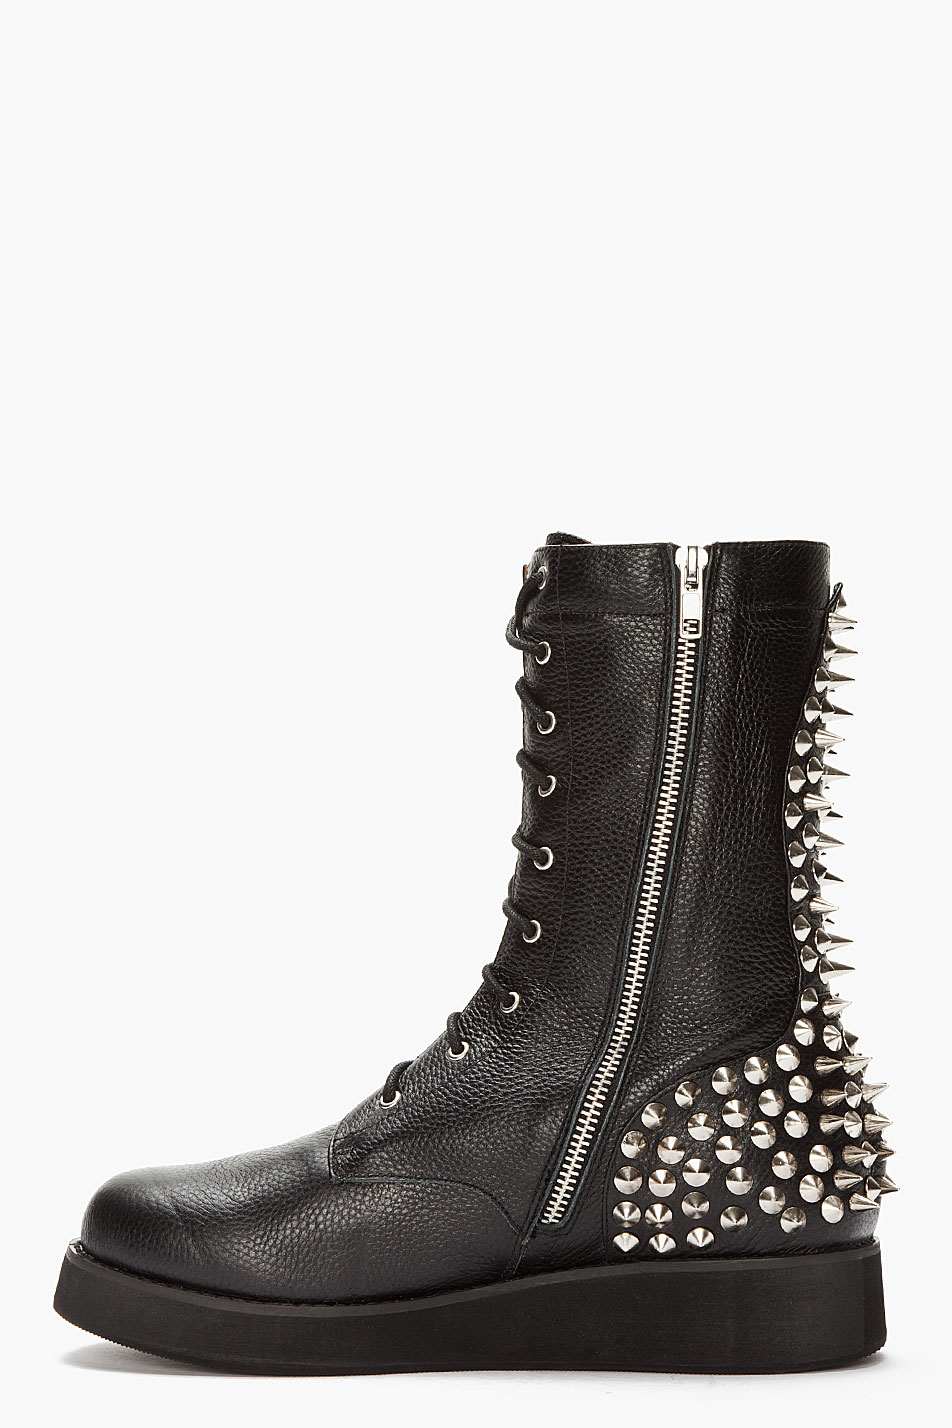 Lyst - Jeffrey campbell Tall Black Leather Spiked Reznorspk Boots in ...